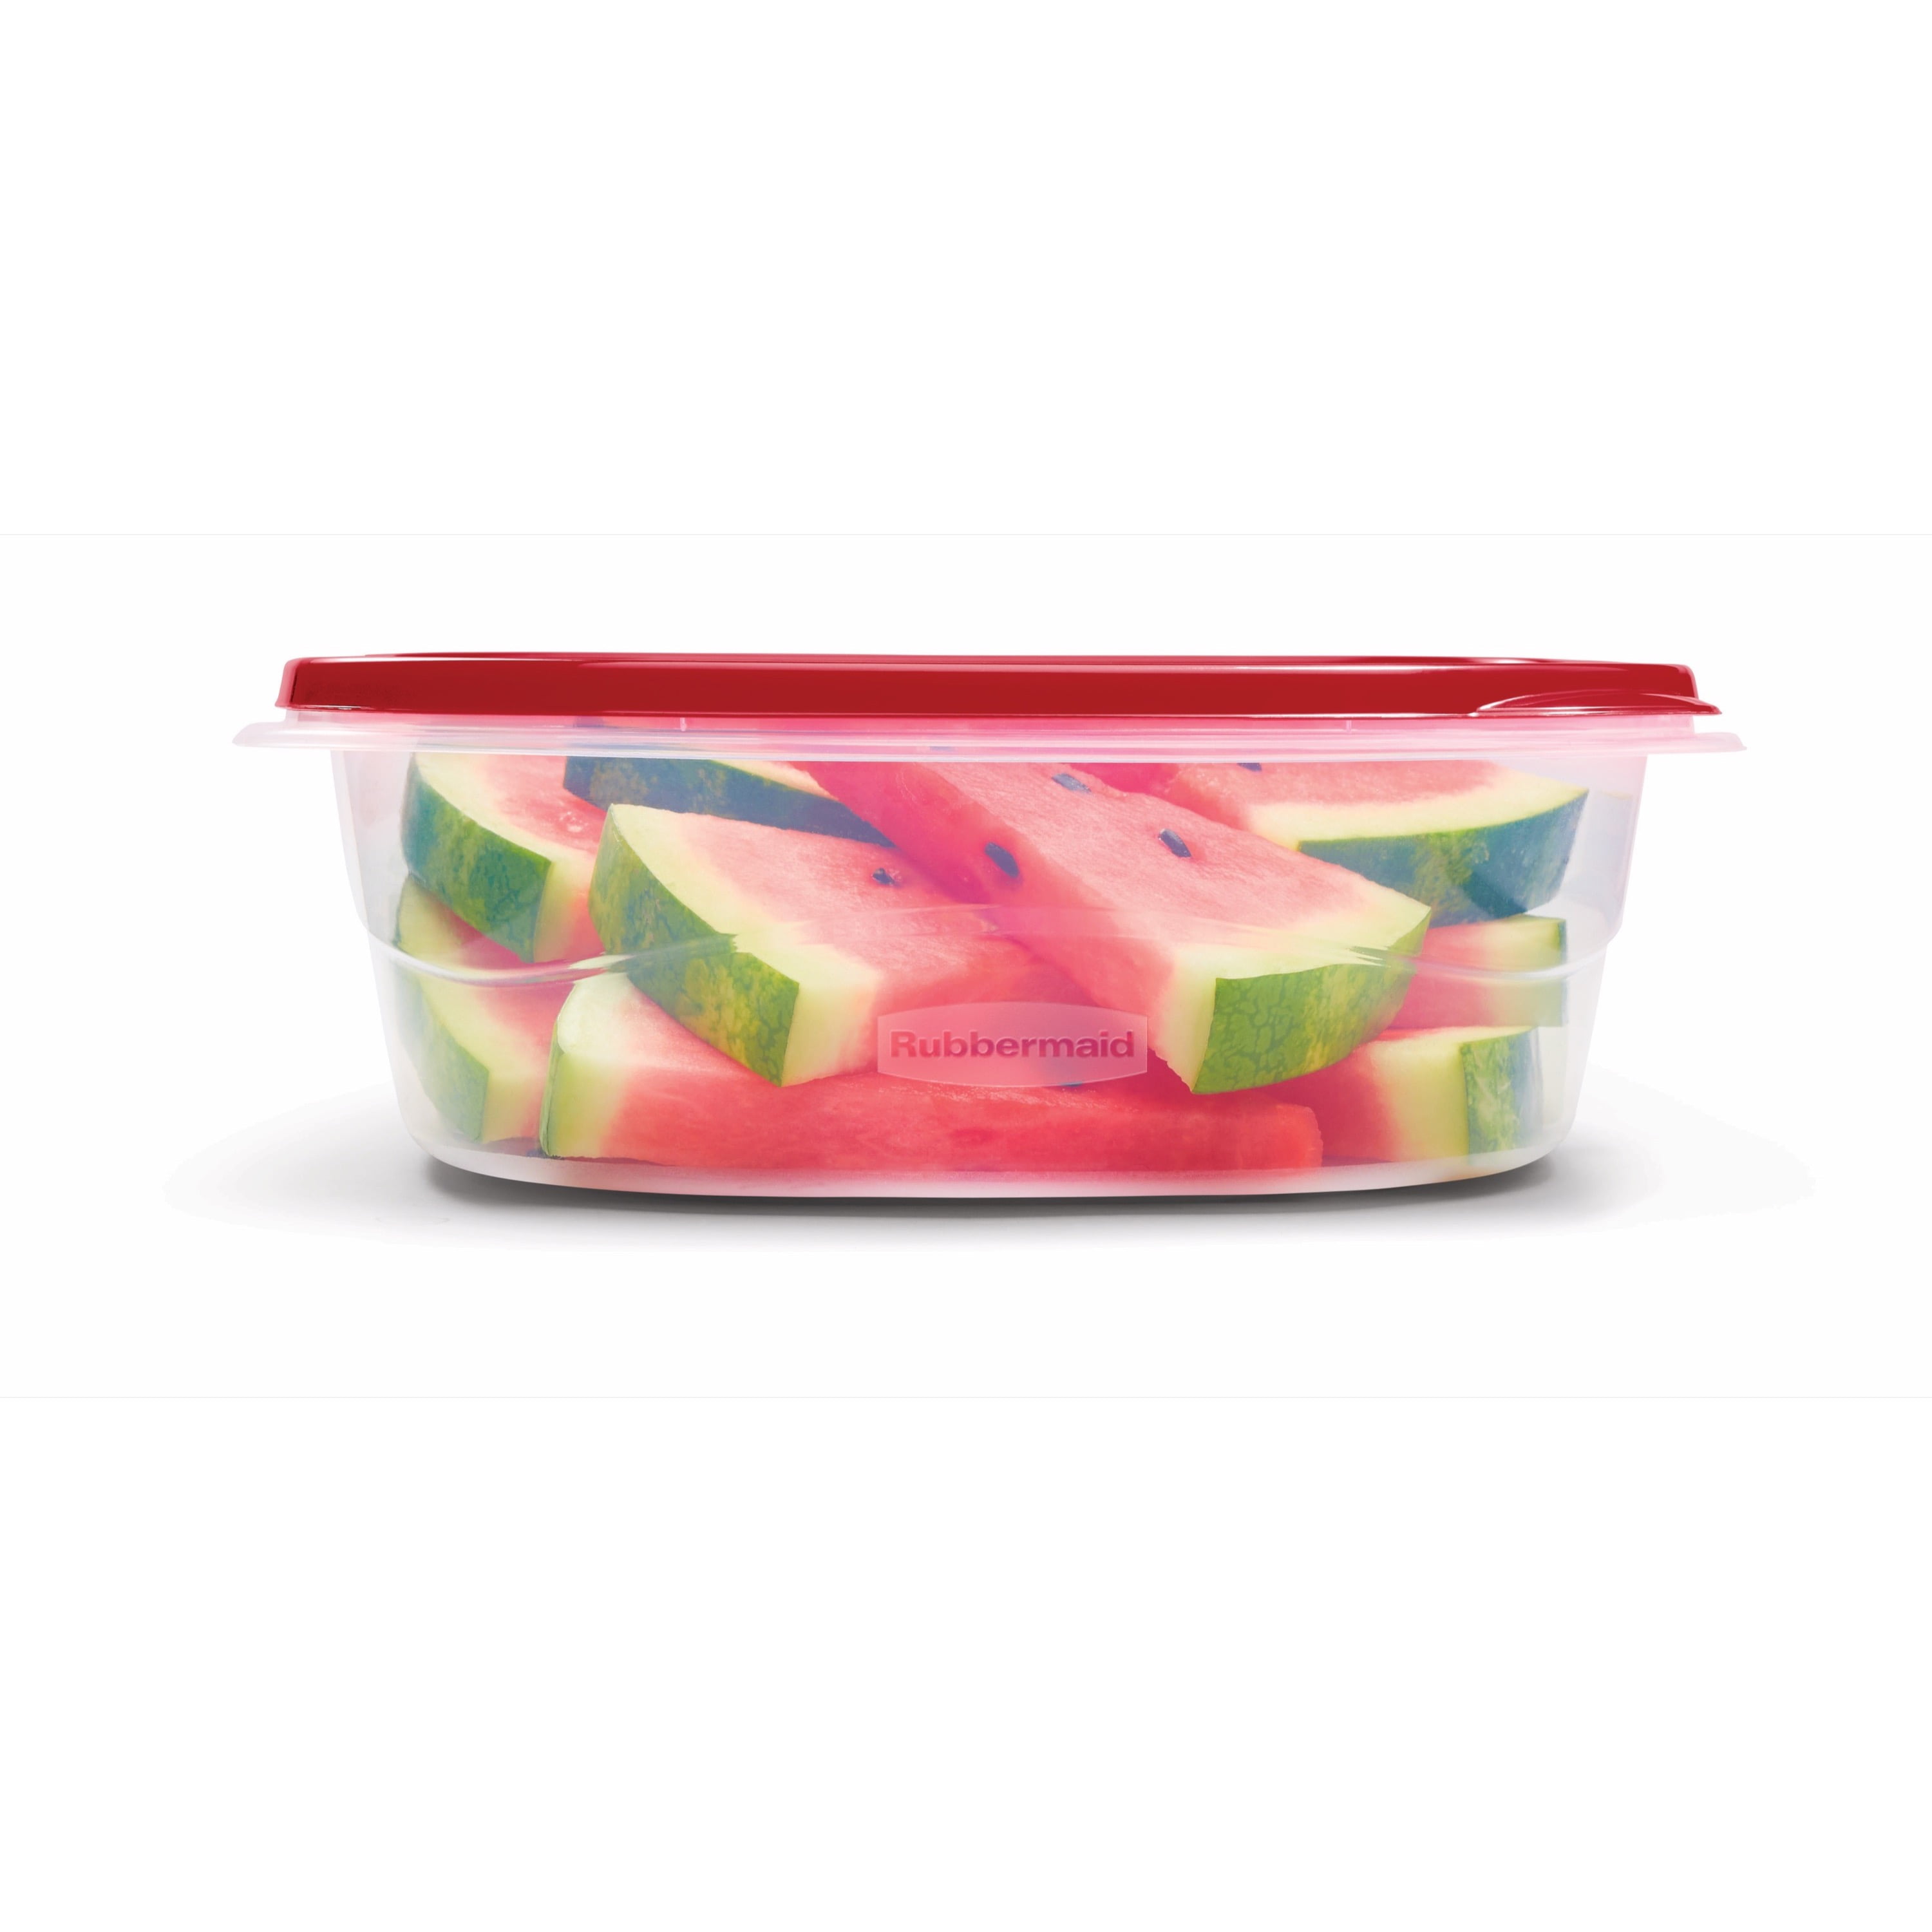 NEW- 2x Plastic Fall Harvest Autumn Food Storage Bowls/Containers